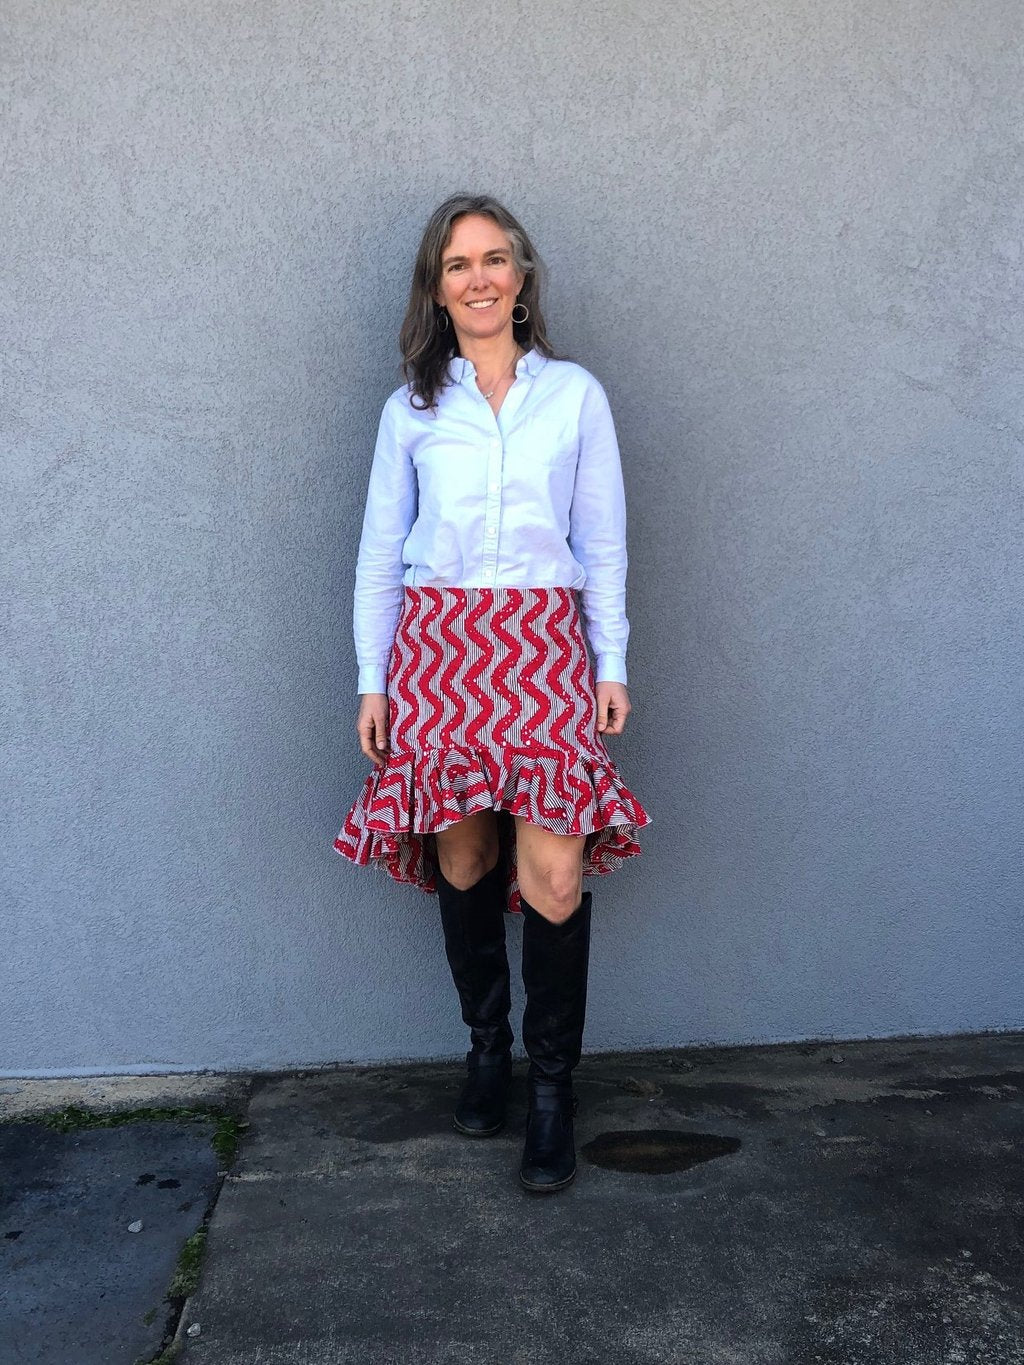 Woman standing in front of a grey wall outside, wearing a buttondown shirt with the Flamenco practice skirt and black boots. Skirt is red and white ankara fabric and is above the knee in the front and top of calf in the back with a ruffled flounce.